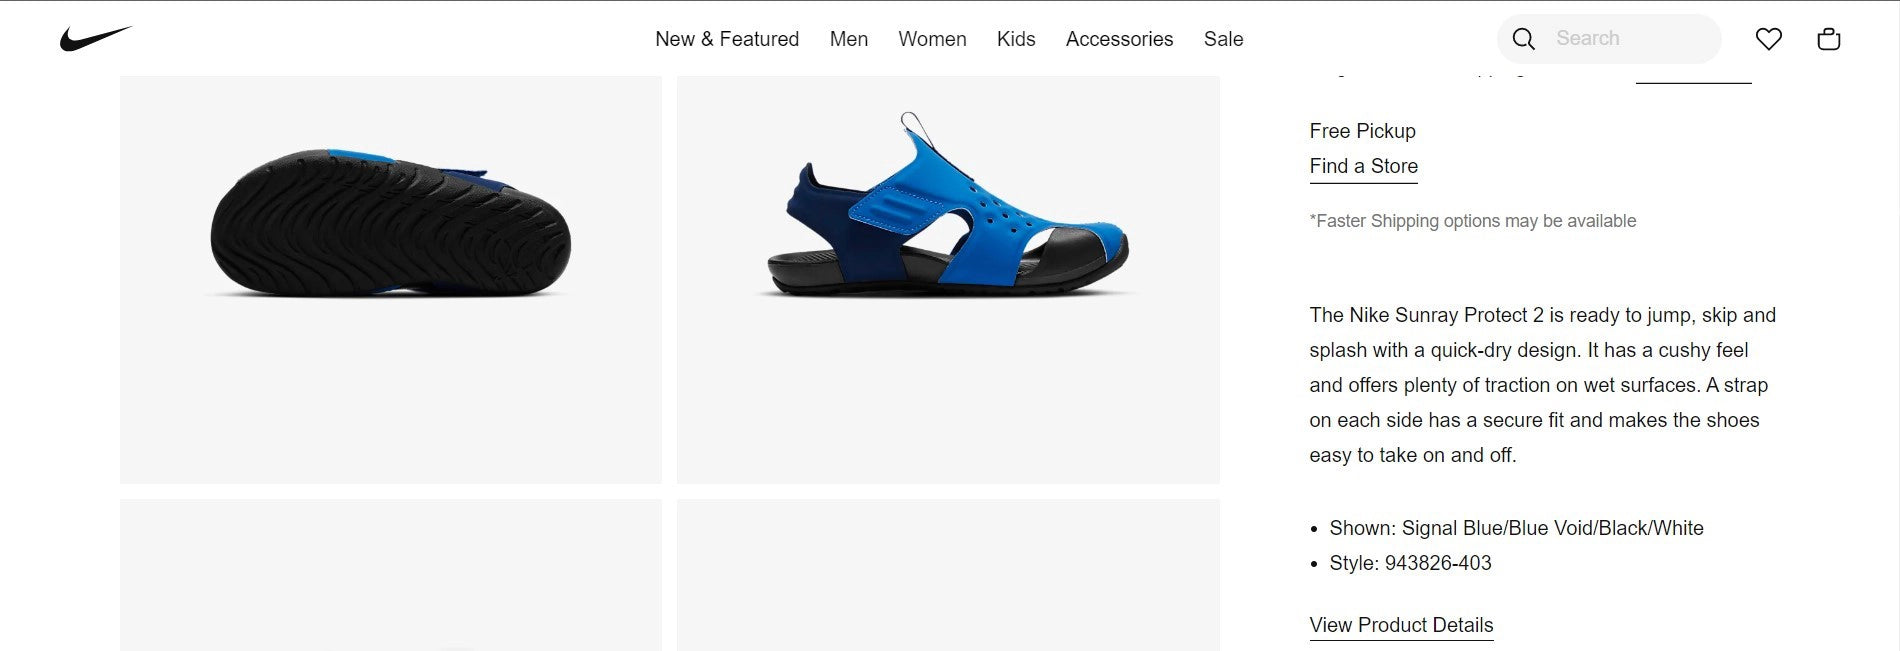 Nike’s product page